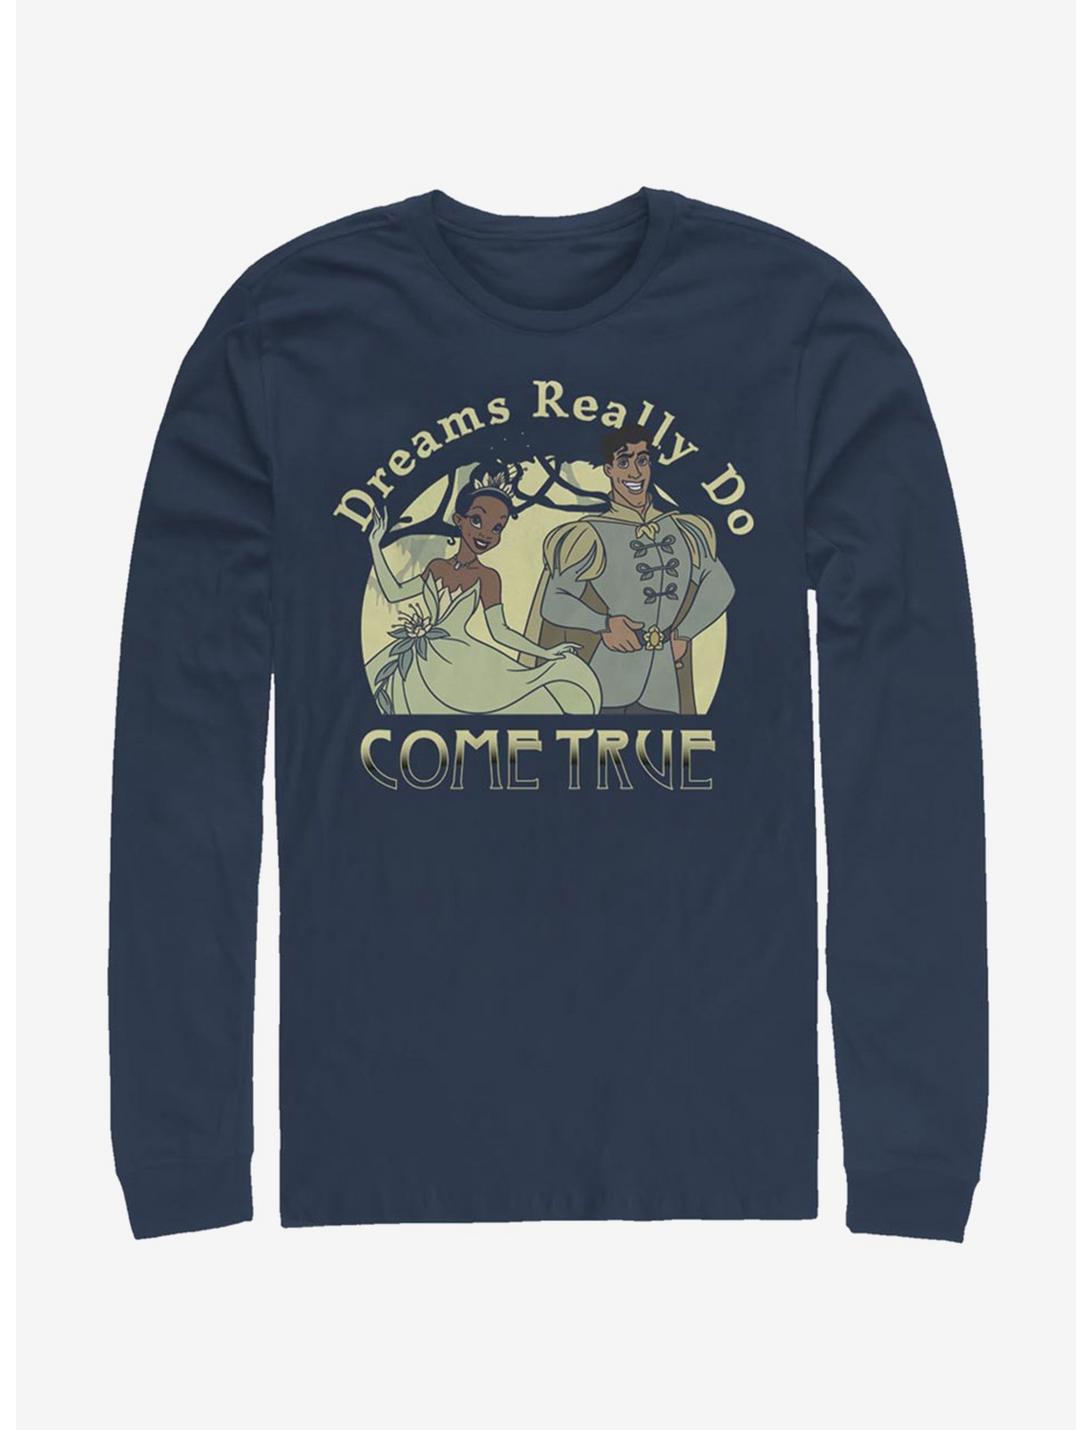 Disney The Princess And The Frog Dreams Do Come True Long-Sleeve T-Shirt, NAVY, hi-res